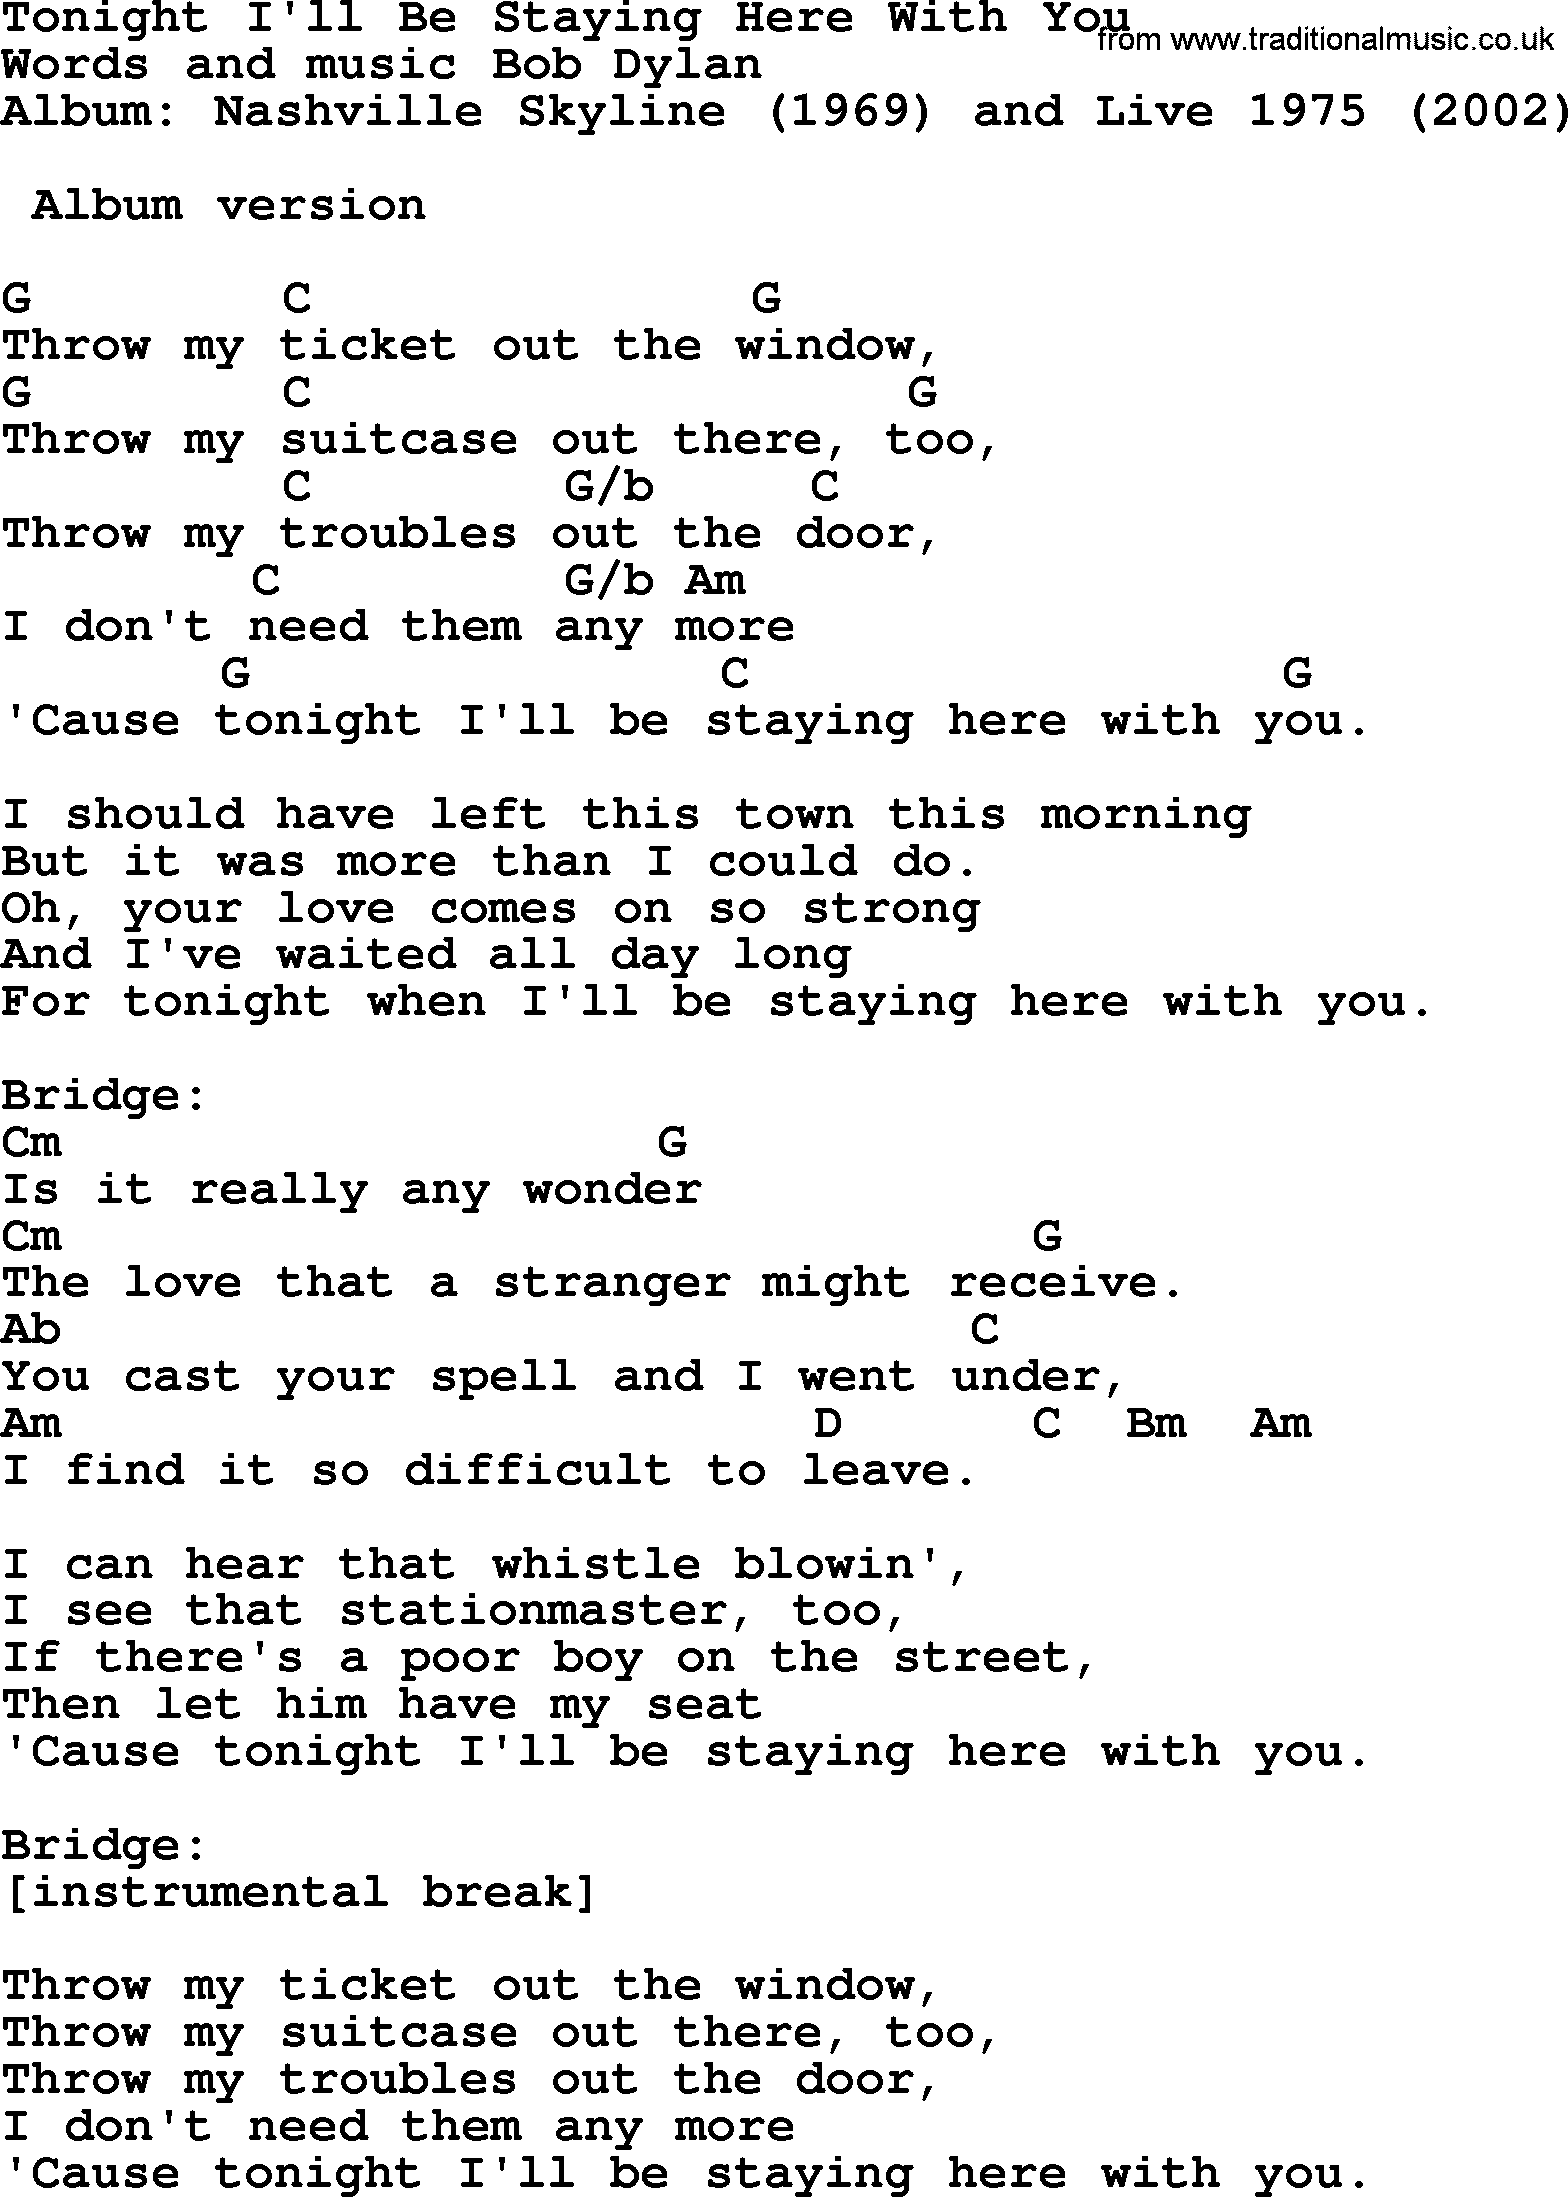 Bob Dylan song, lyrics with chords - Tonight I'll Be Staying Here With You